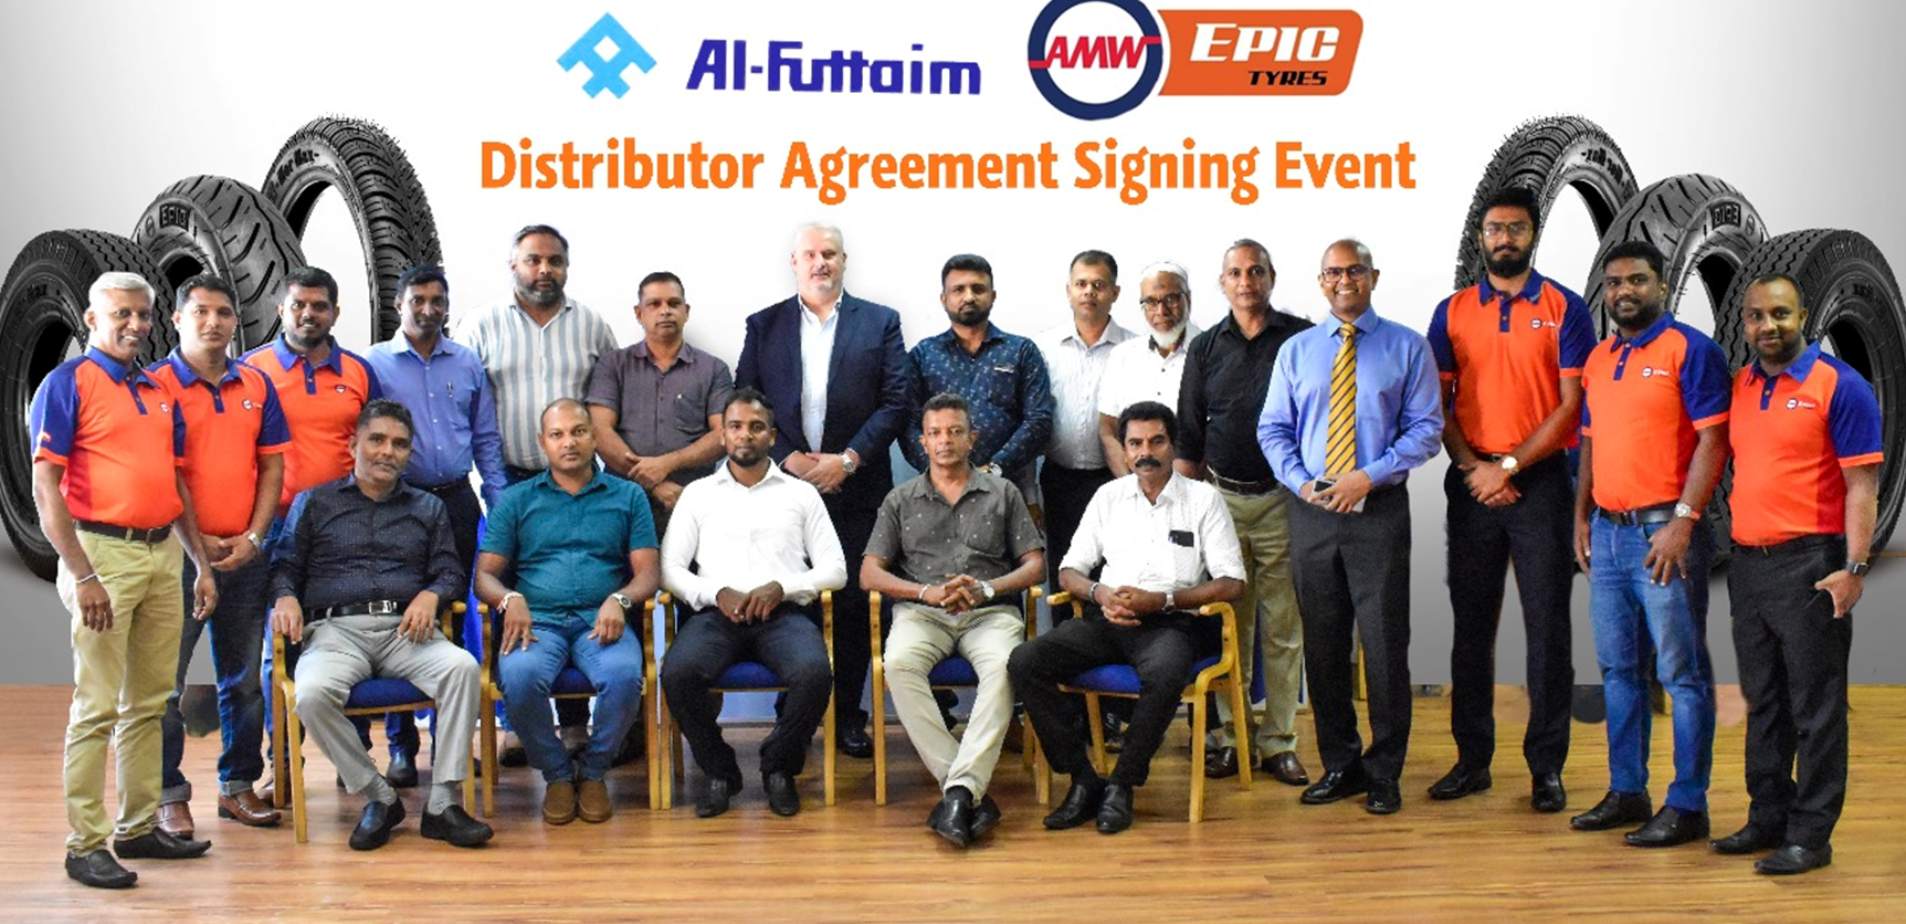 The AMW Epic Tyres Team in attendance at the signing event, along with Mr. Virann De Zoysa, Director Manufacturing, sharing insightful words and Mr. Andre Bonthuys, Group Managing Director, addressing the enthusiastic gathering.